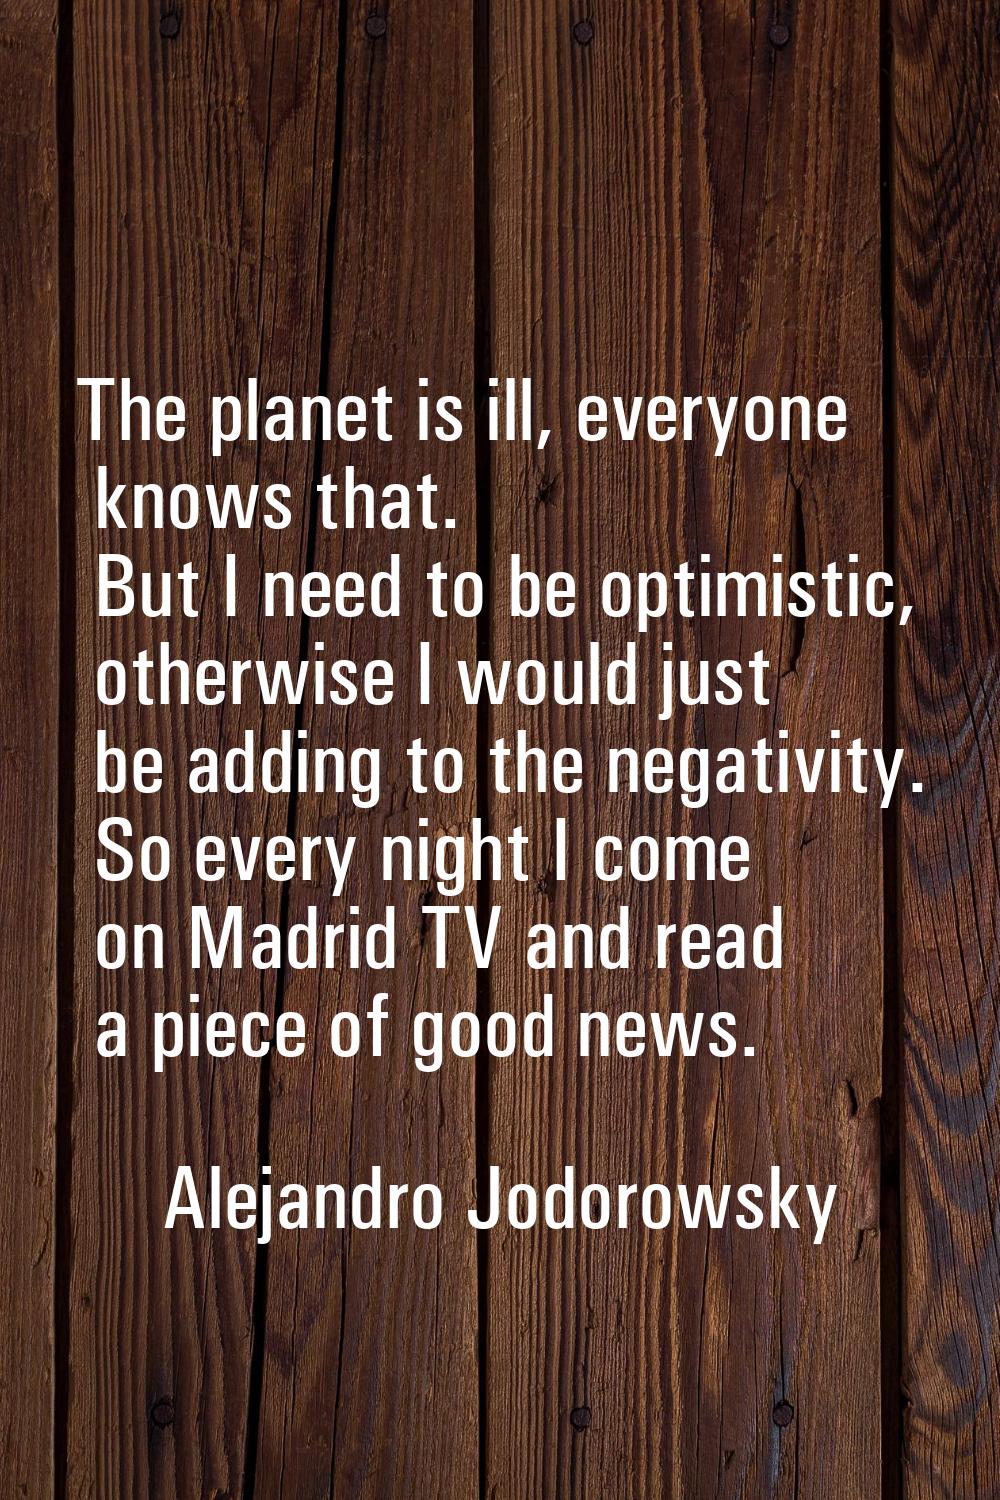 The planet is ill, everyone knows that. But I need to be optimistic, otherwise I would just be addi